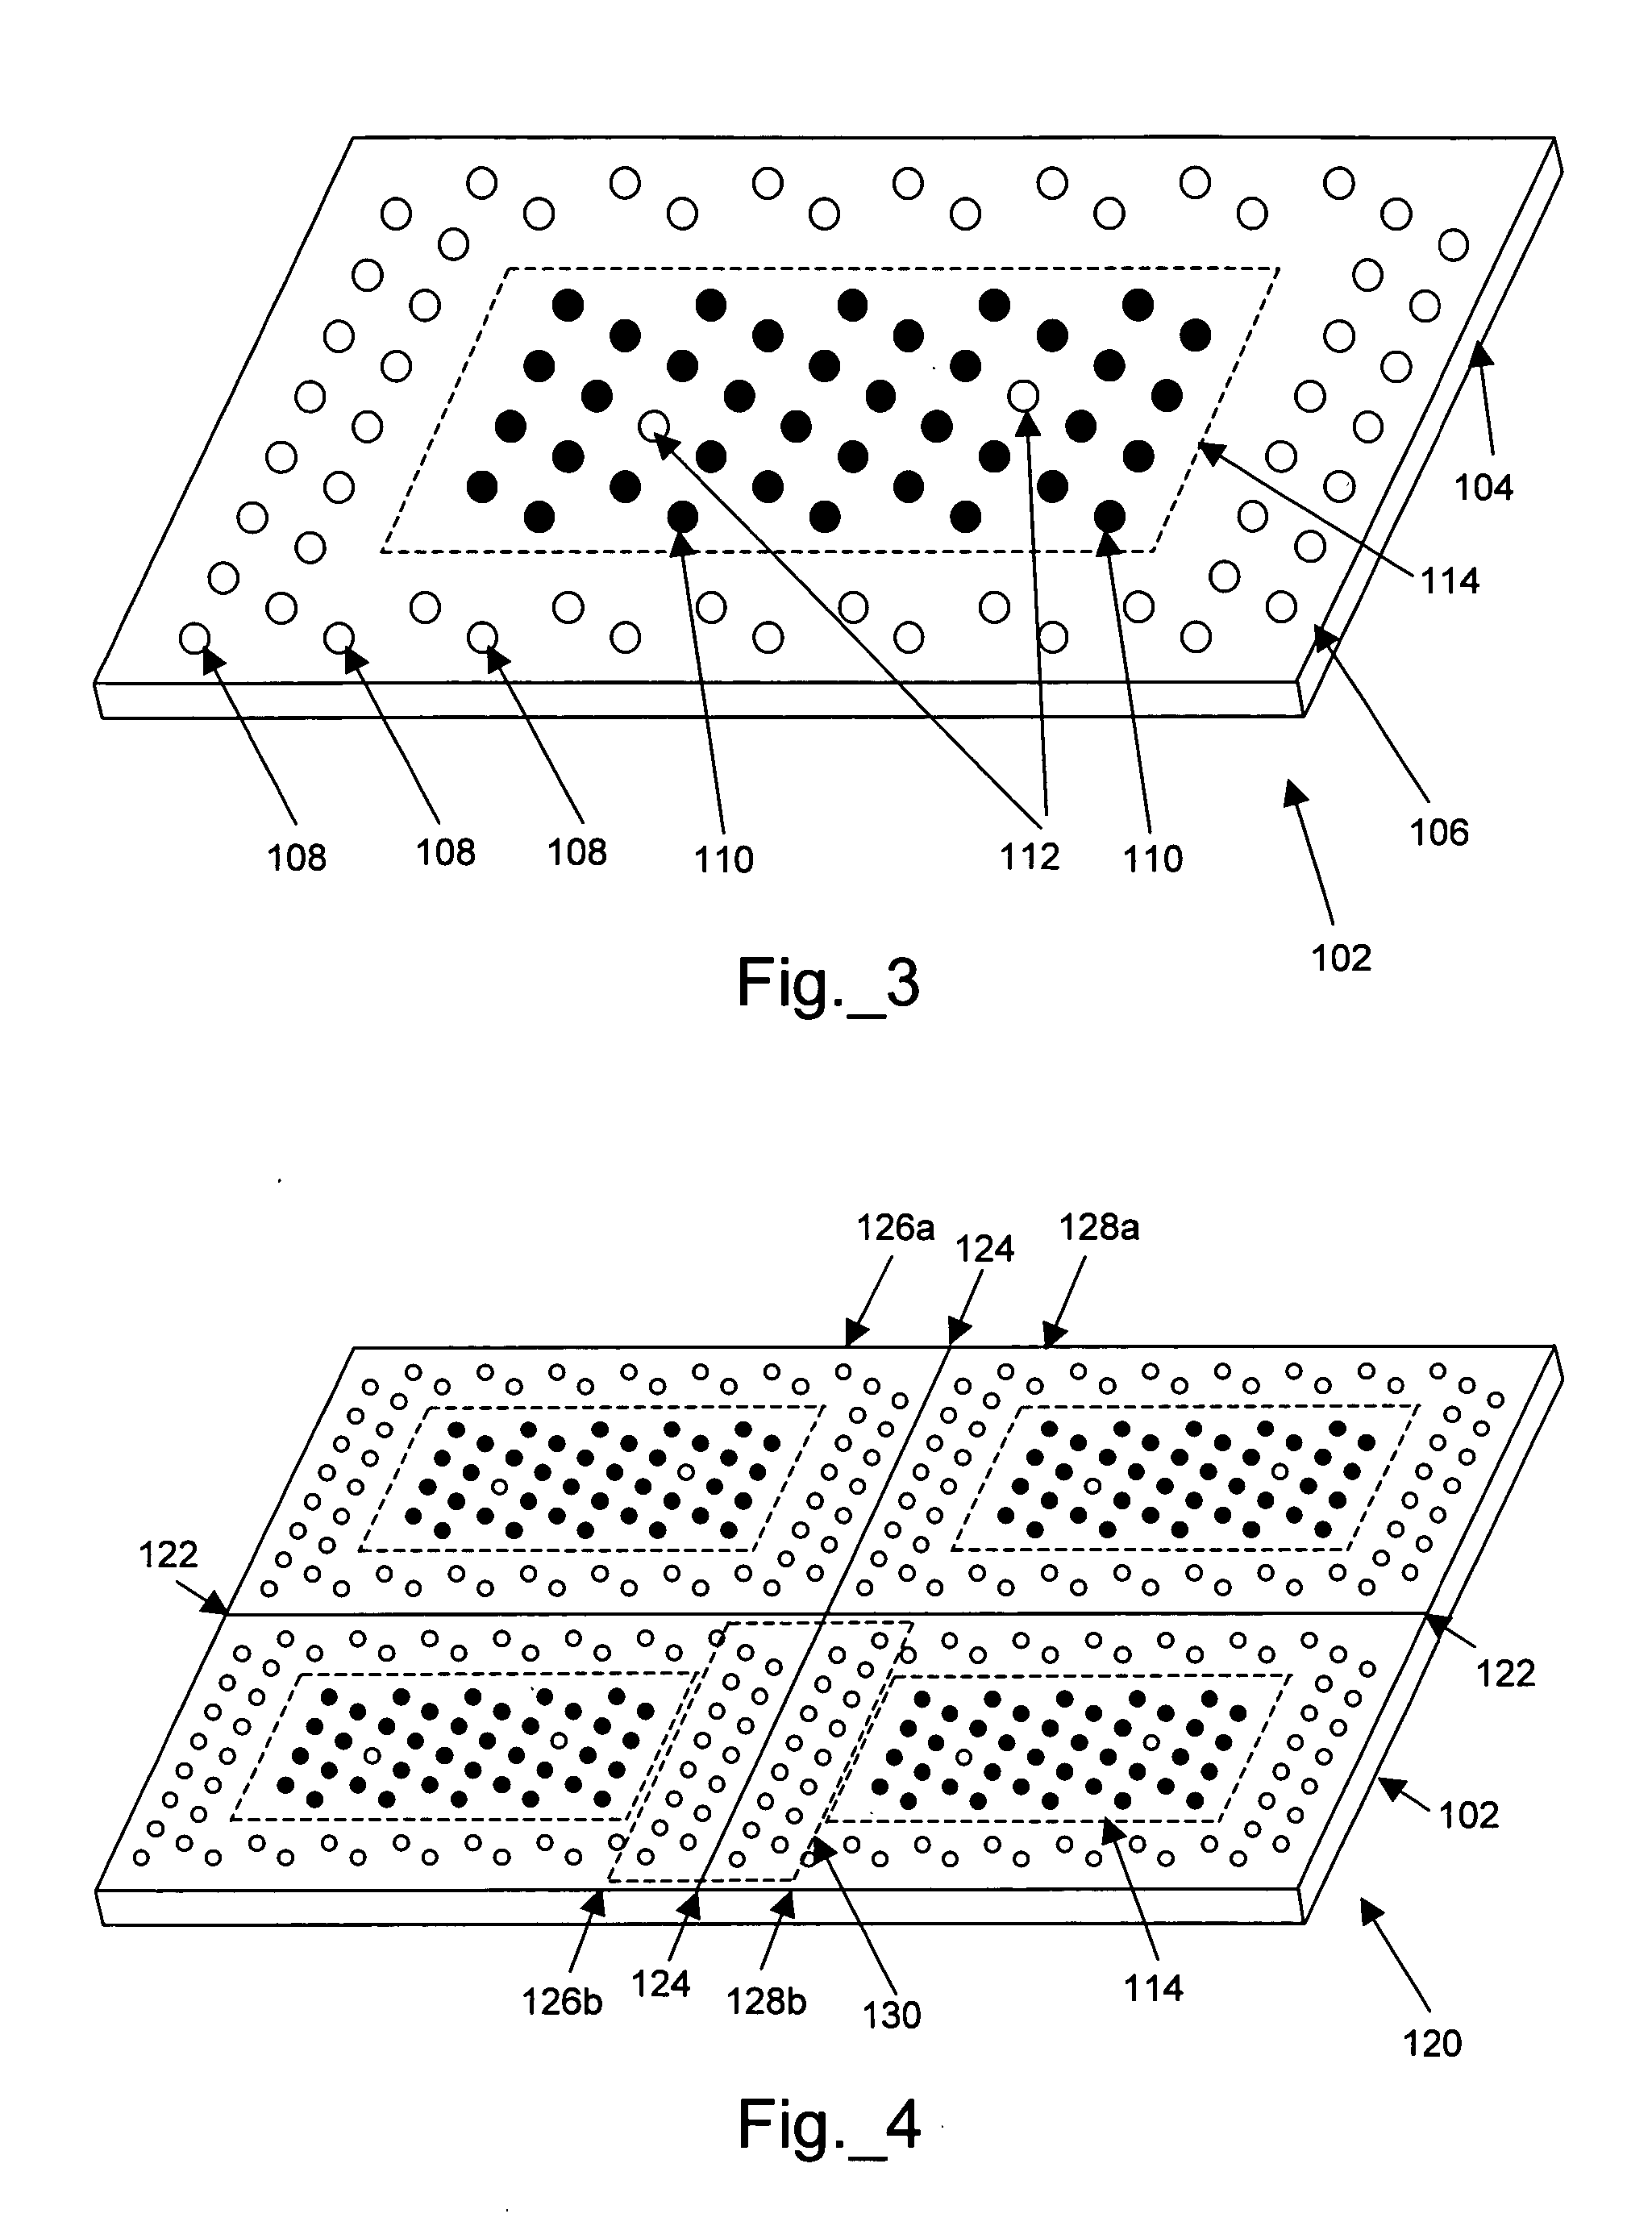 Quality control method for array manufacture